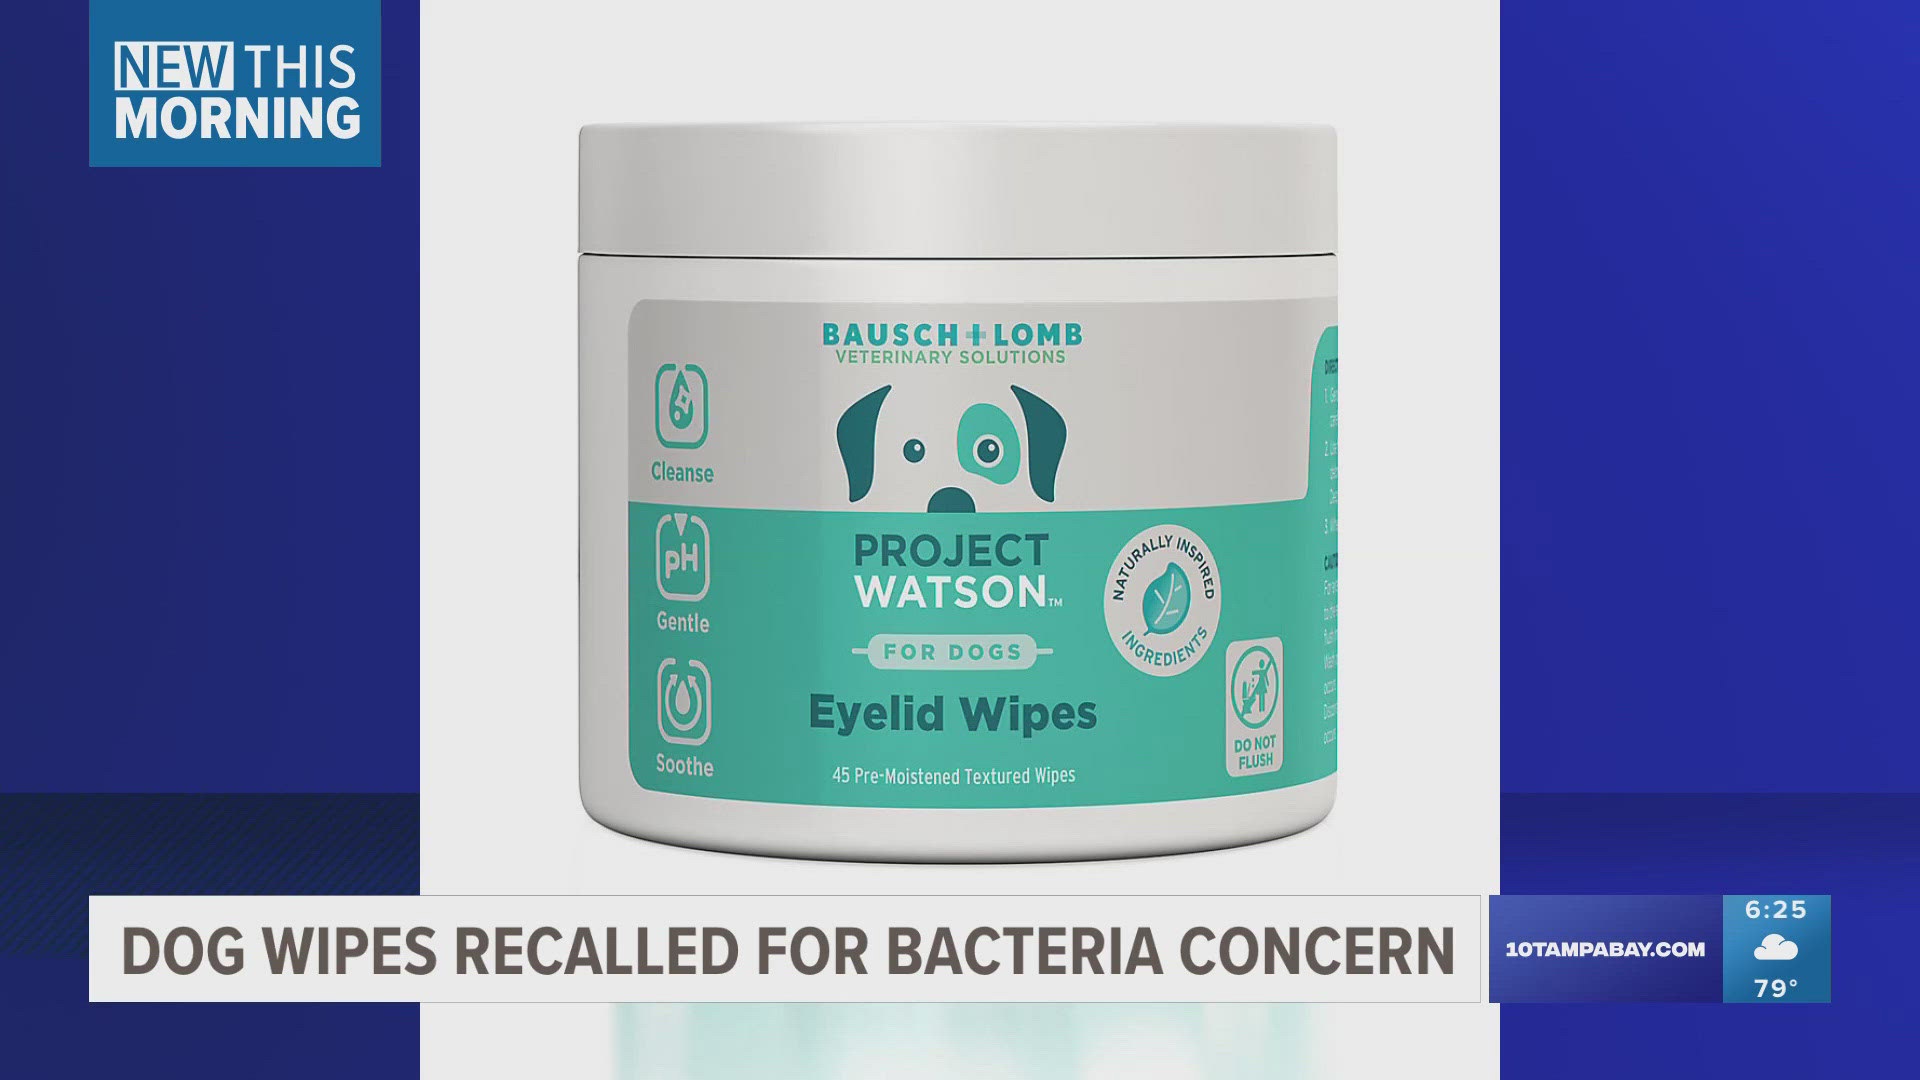 Project Watson Eyelid Wipes for dogs can grow bacteria when the container is left open.